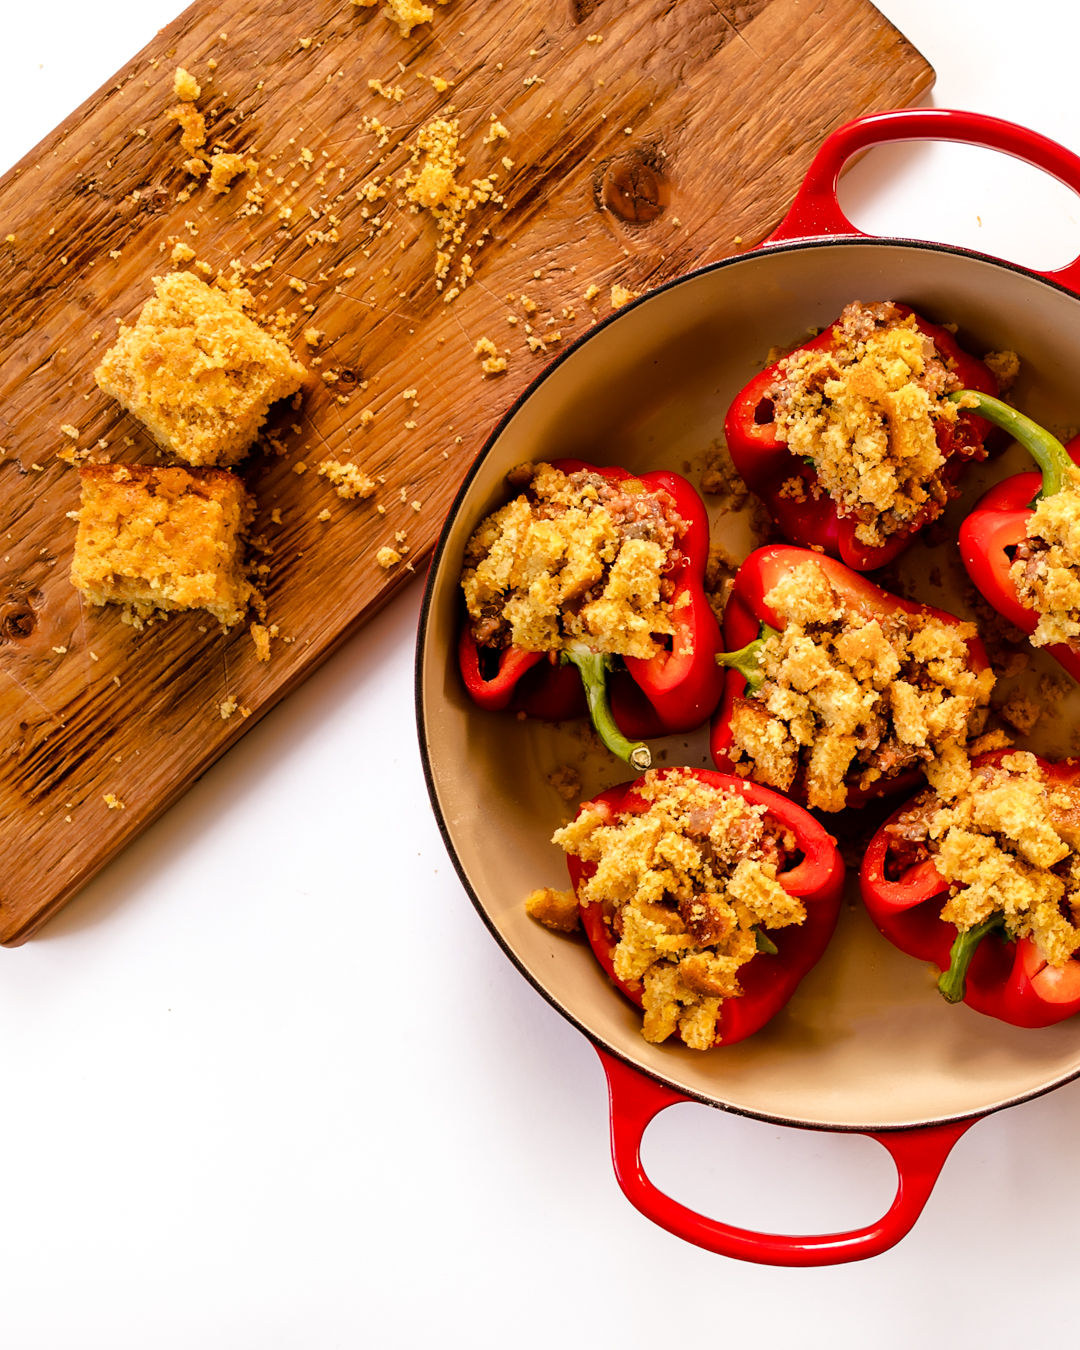 Stuffed peppers with cornbread stuffing